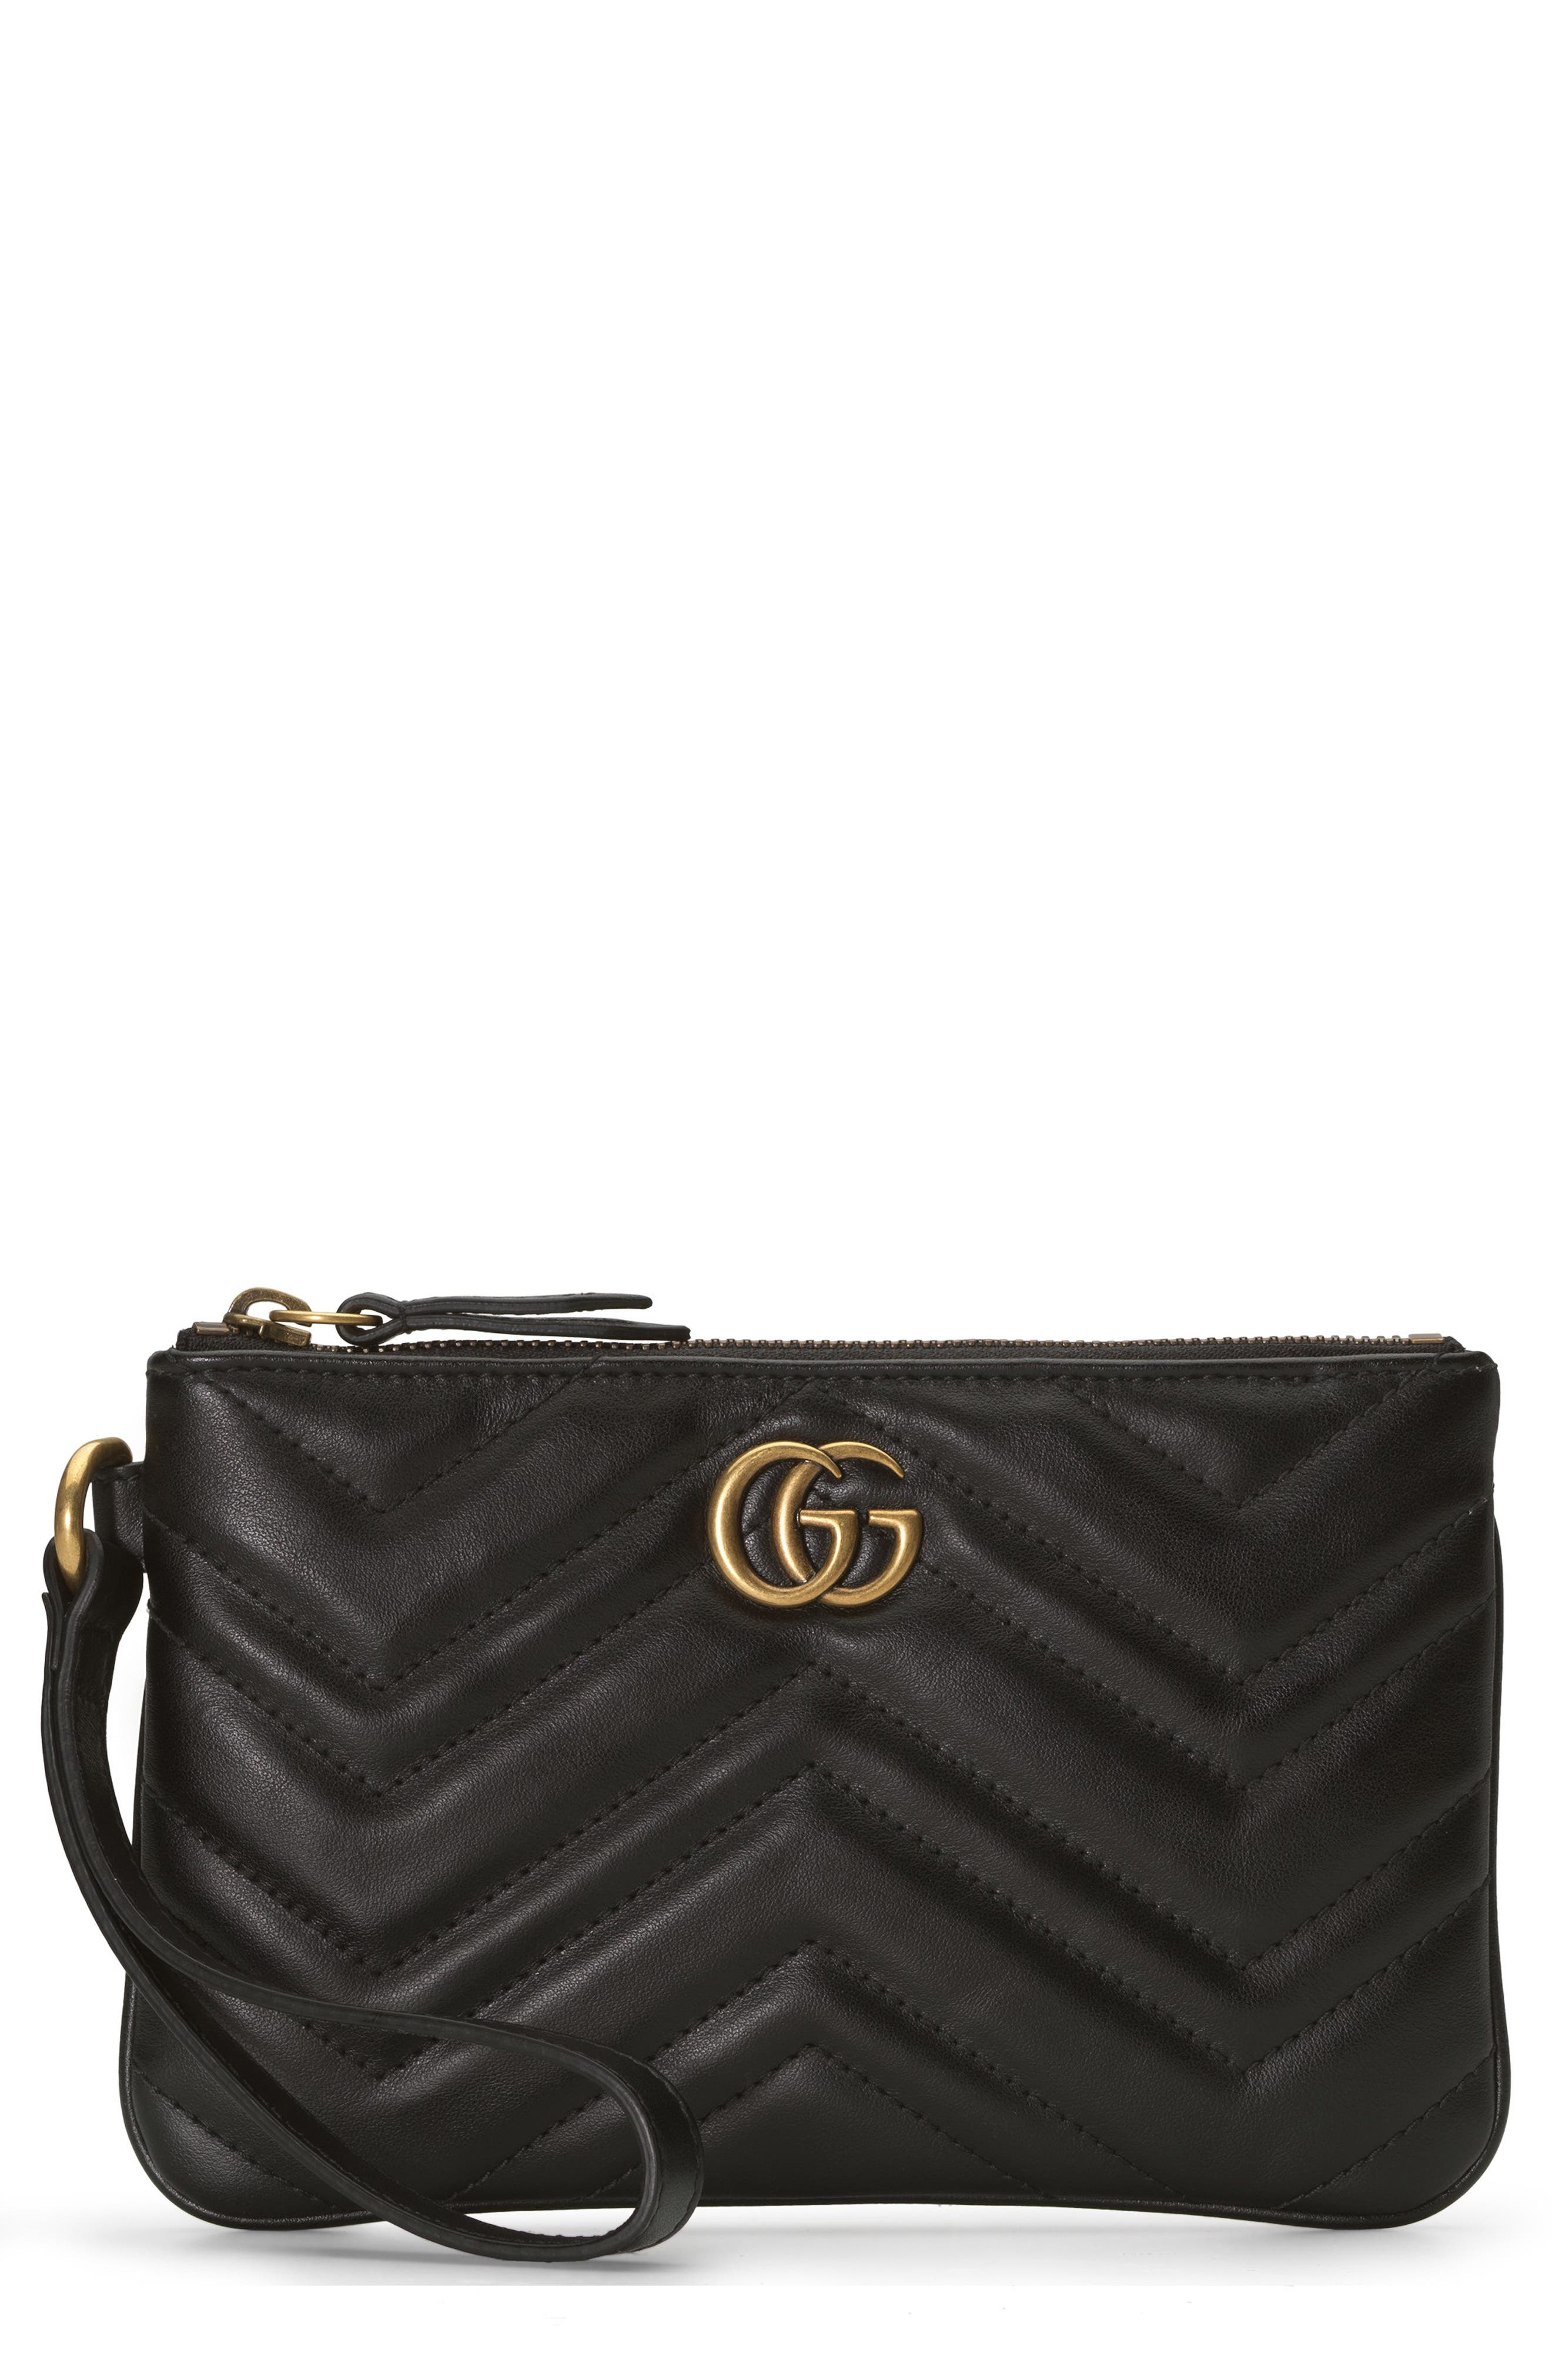 Gucci Quilted Leather Wristlet | Nordstrom